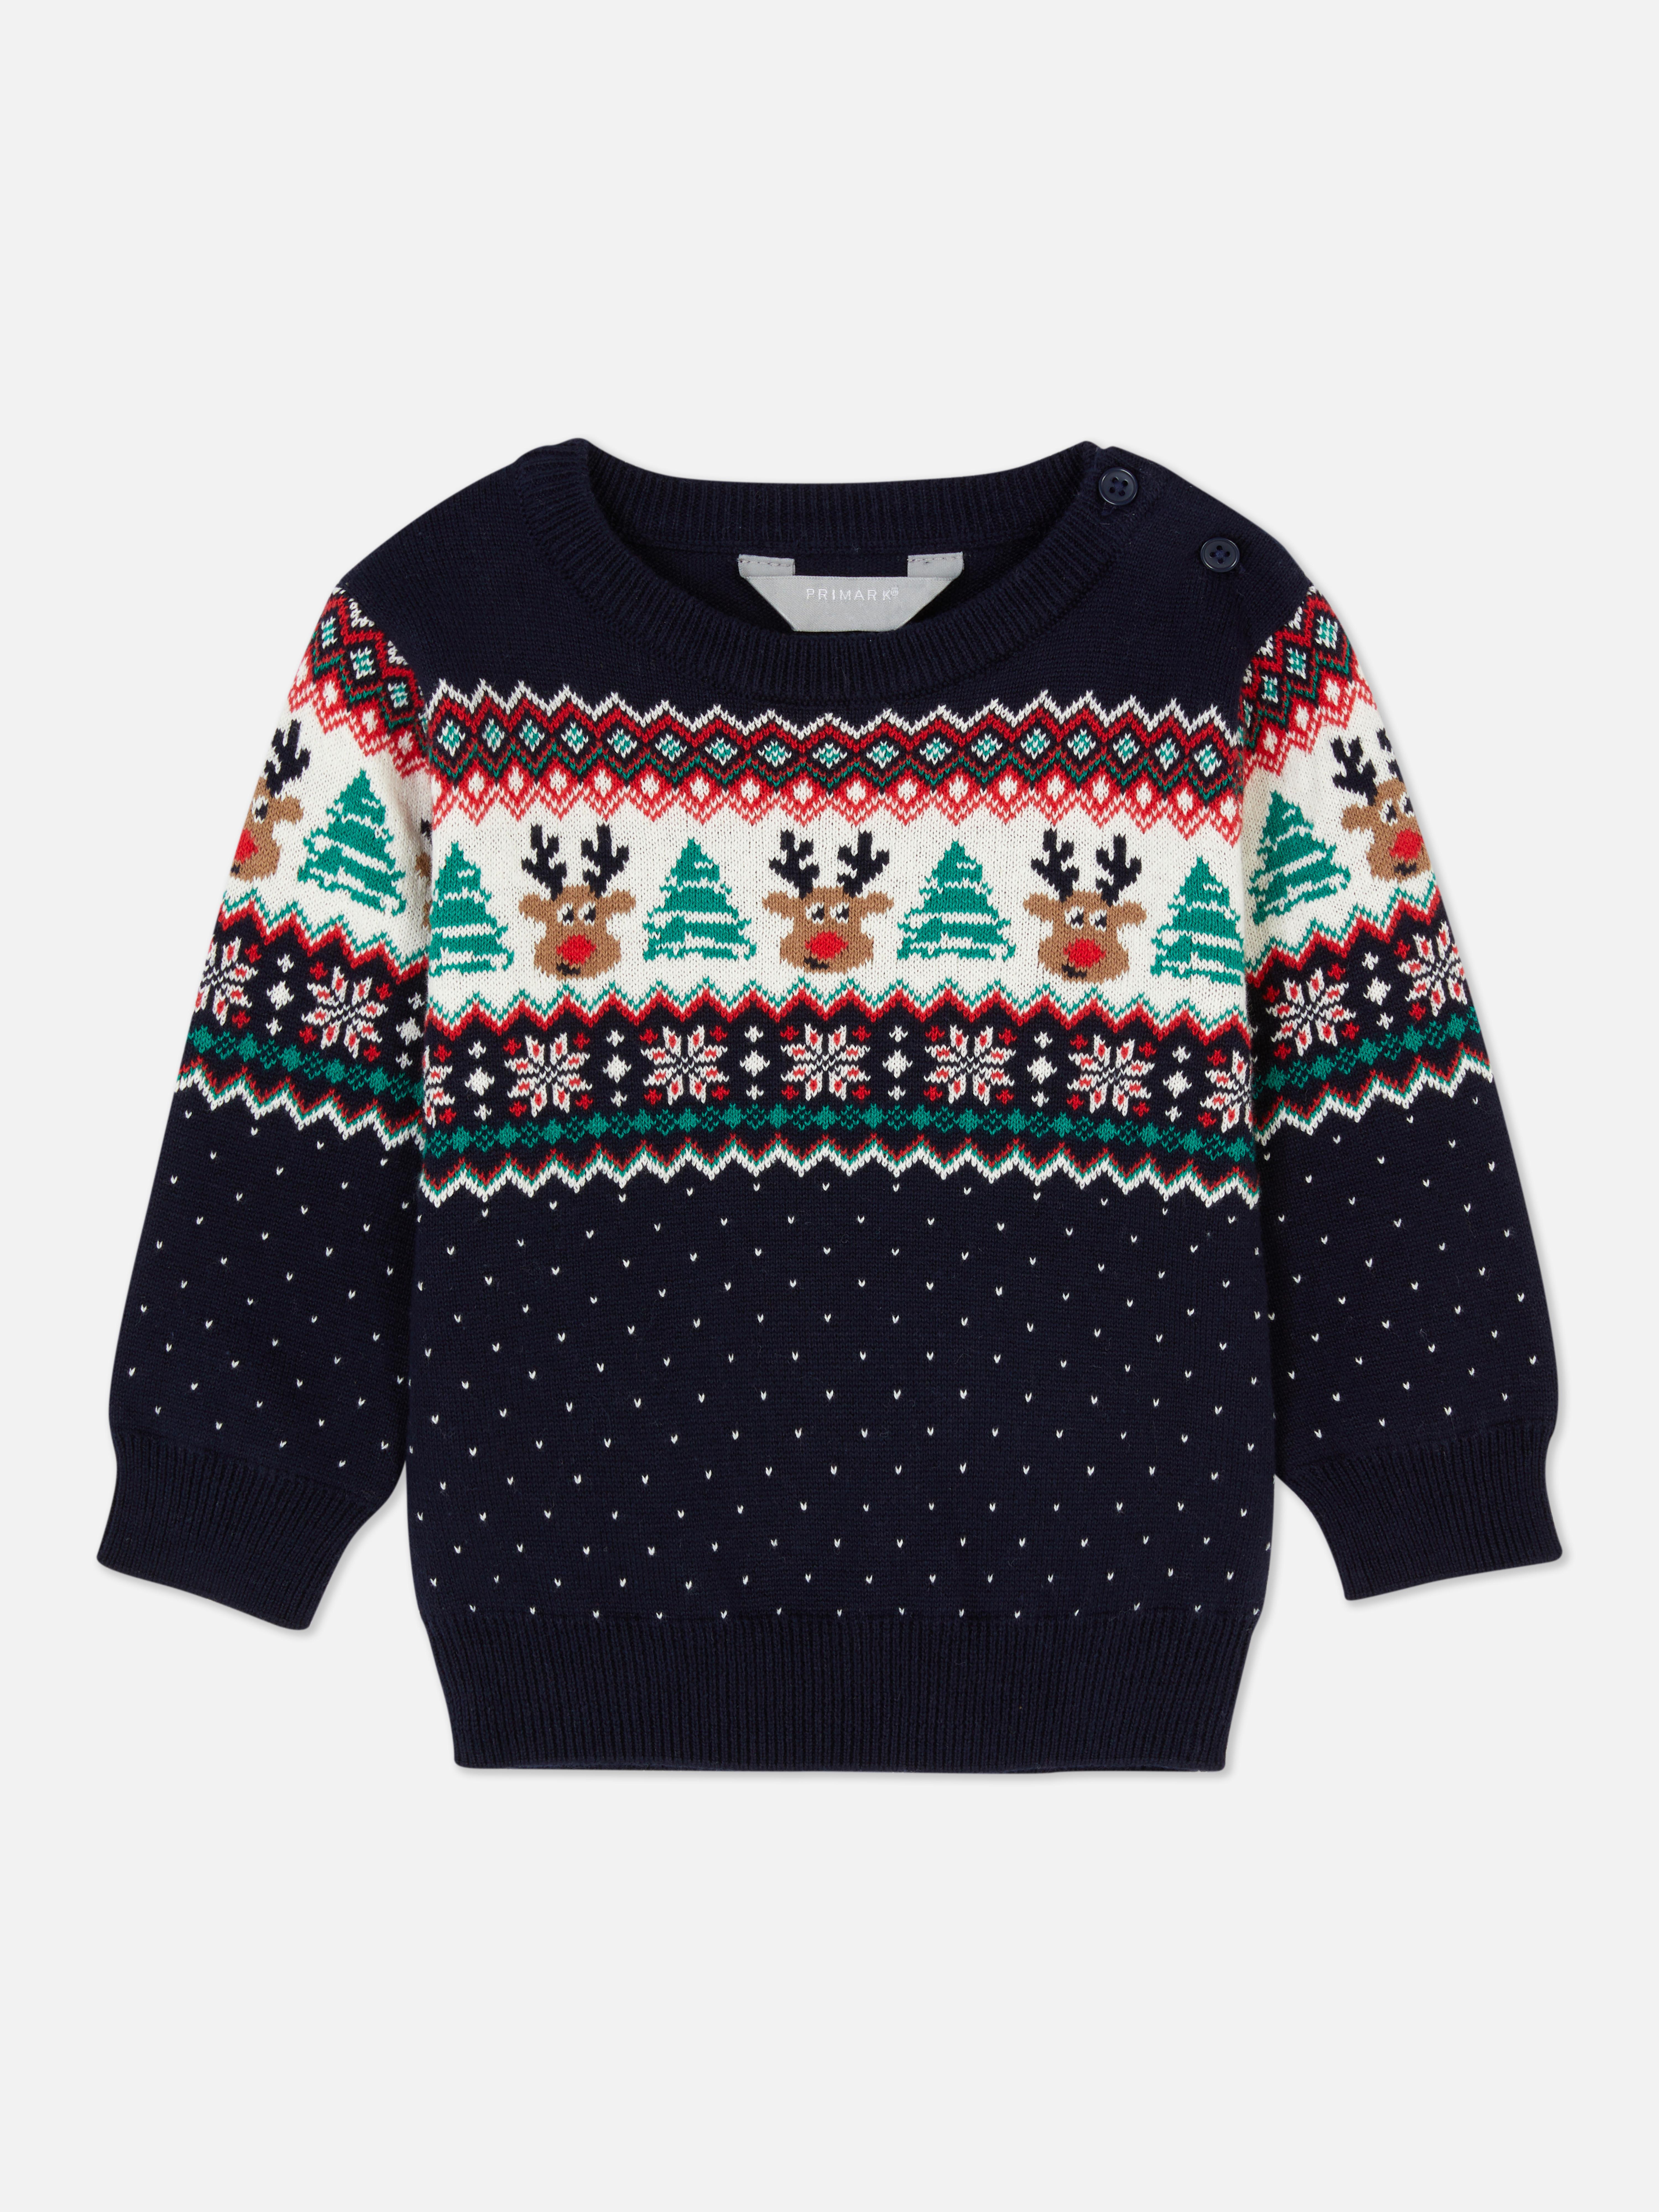 Fair Isle Christmas Sweater | Baby Boy Clothes | Baby & Newborn Clothes ...